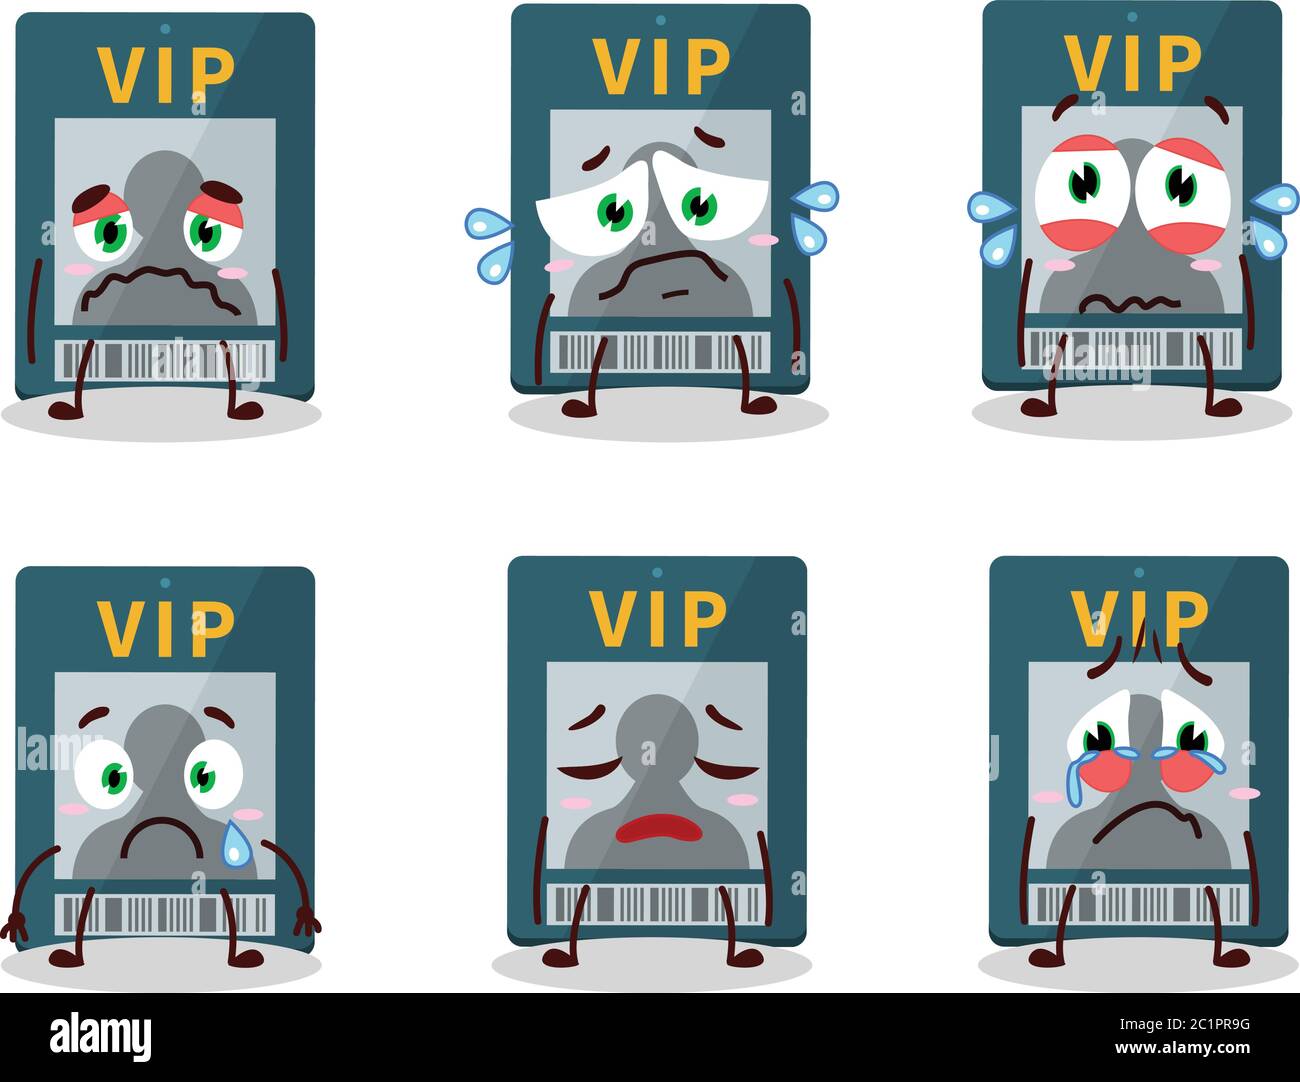 Vip card cartoon character with sad expression Stock Vector